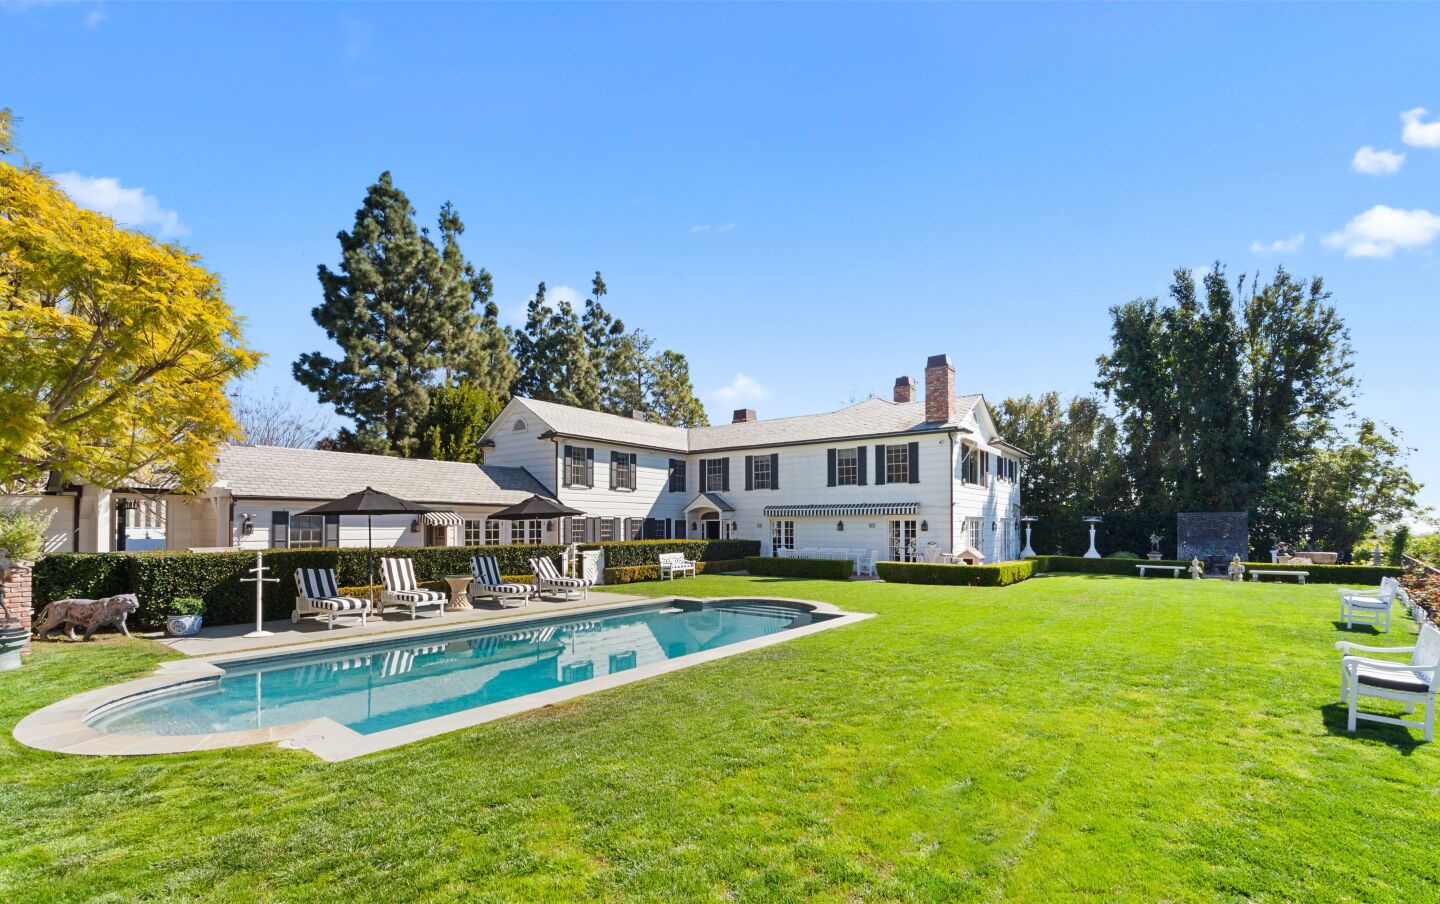 The cul-de-sac compound includes a 1930s home, two-story guesthouse, swimming pool and tiered garden overlooking the Bel Air Country Club golf course.